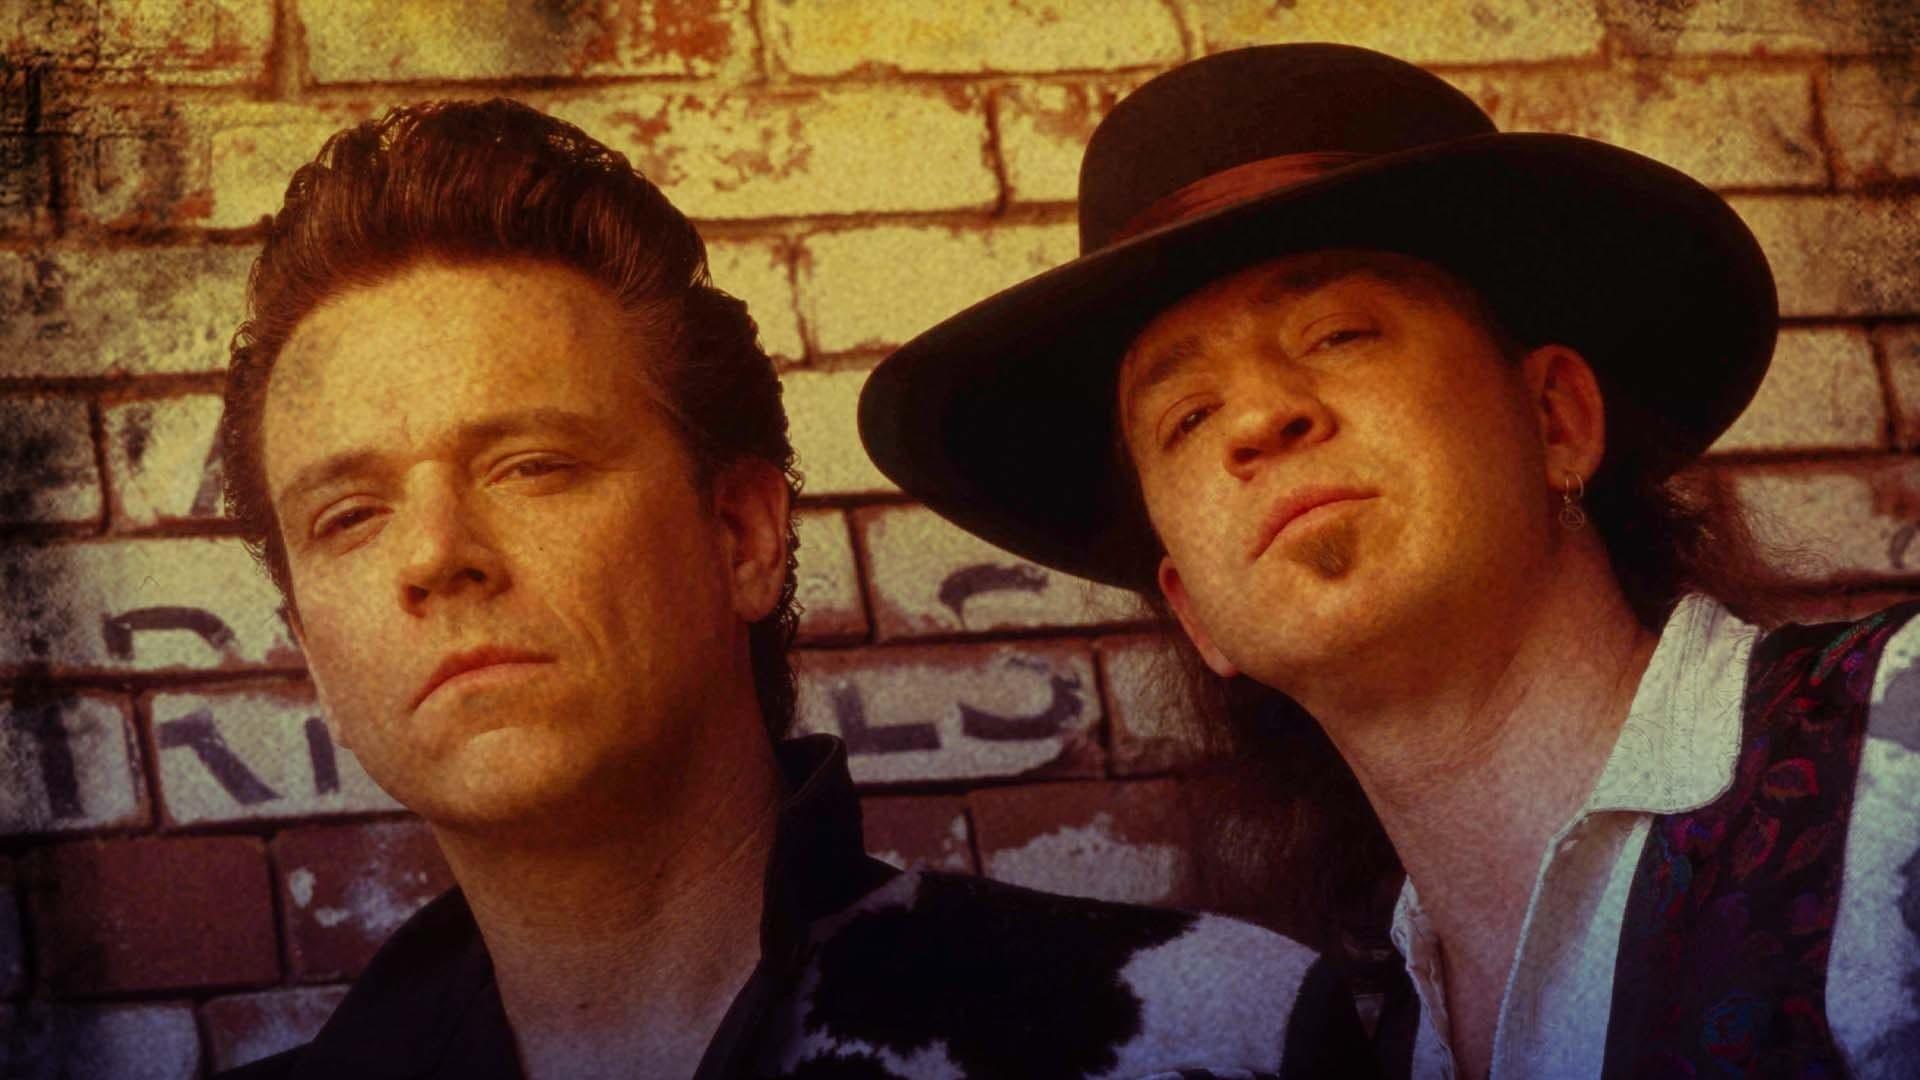 Jimmie & Stevie Ray Vaughan: Brothers in Blues backdrop